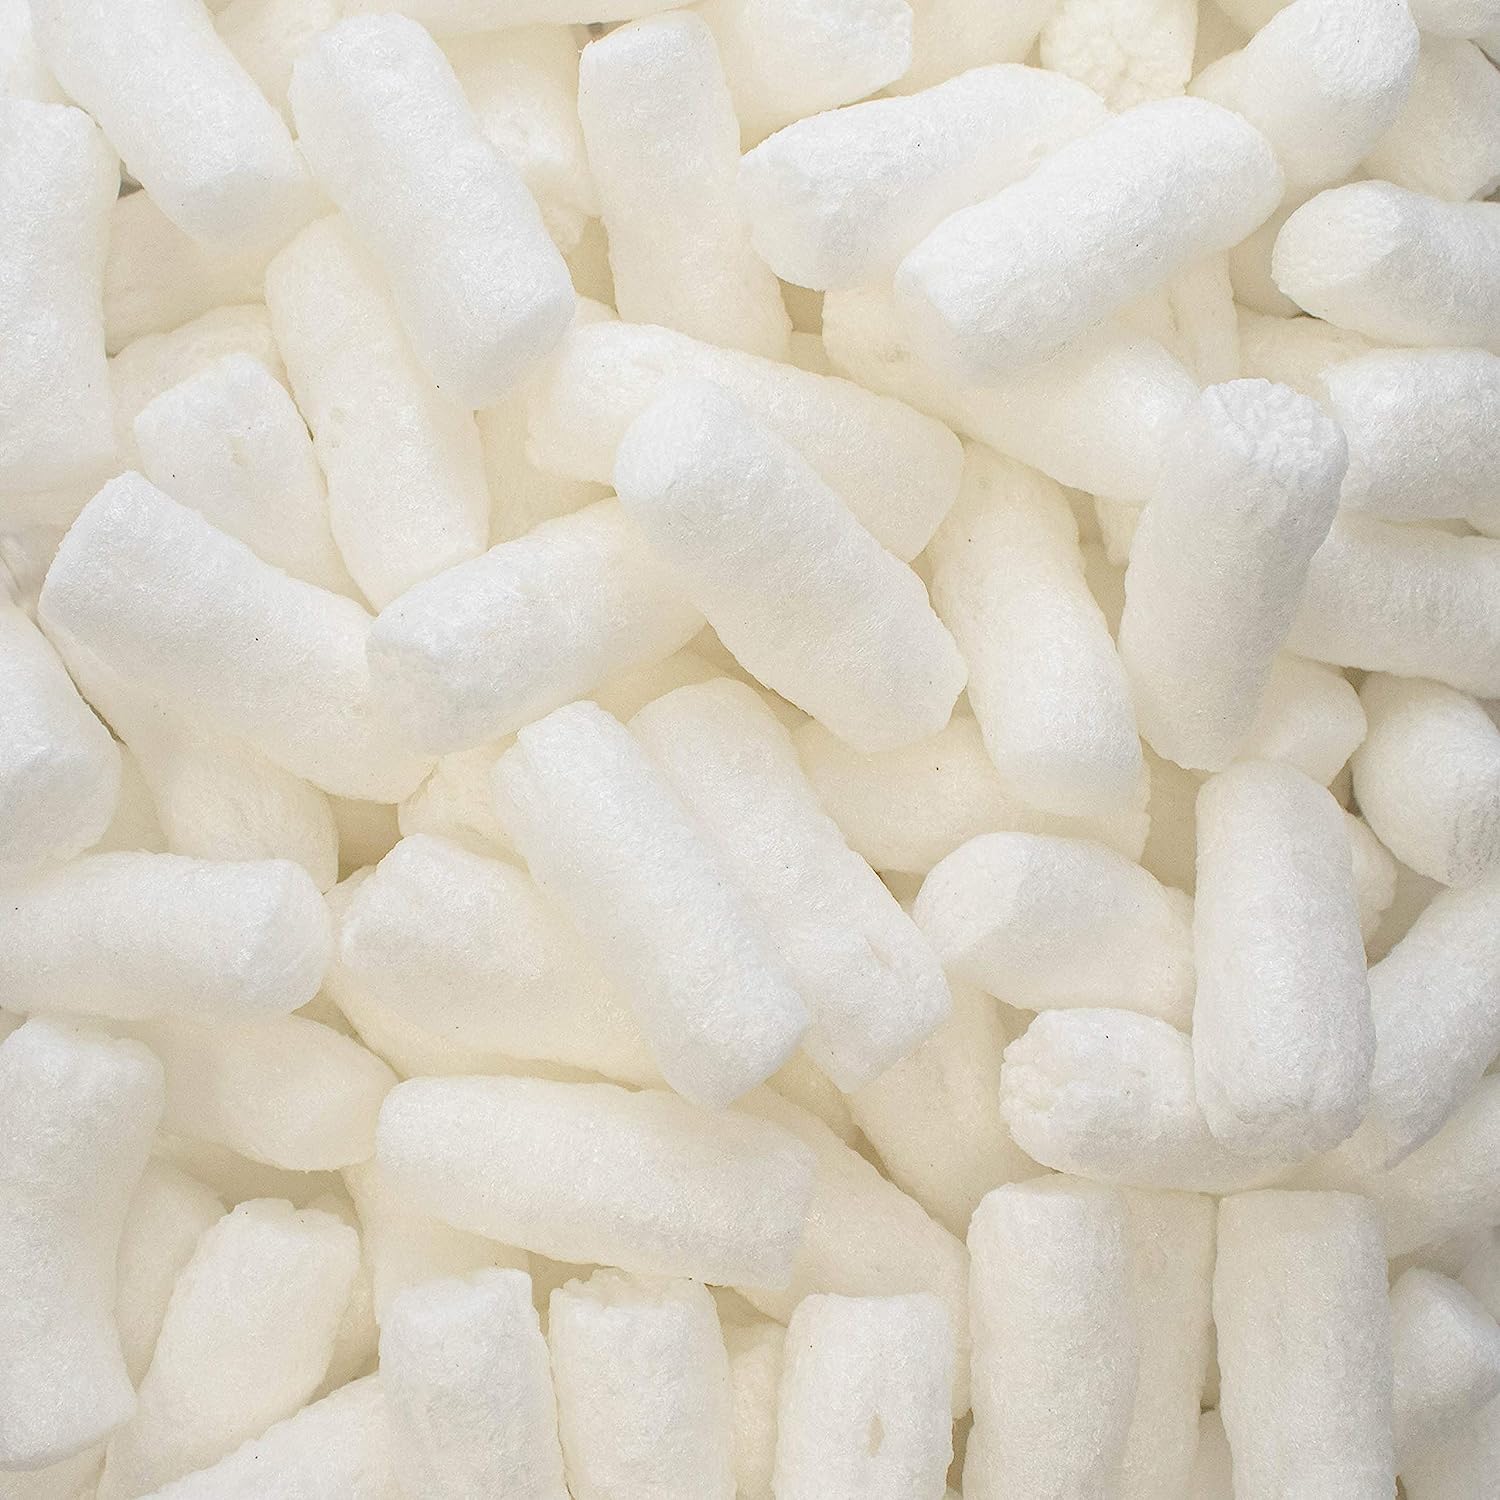 Simple Experiments with Biodegradable Packing Peanuts